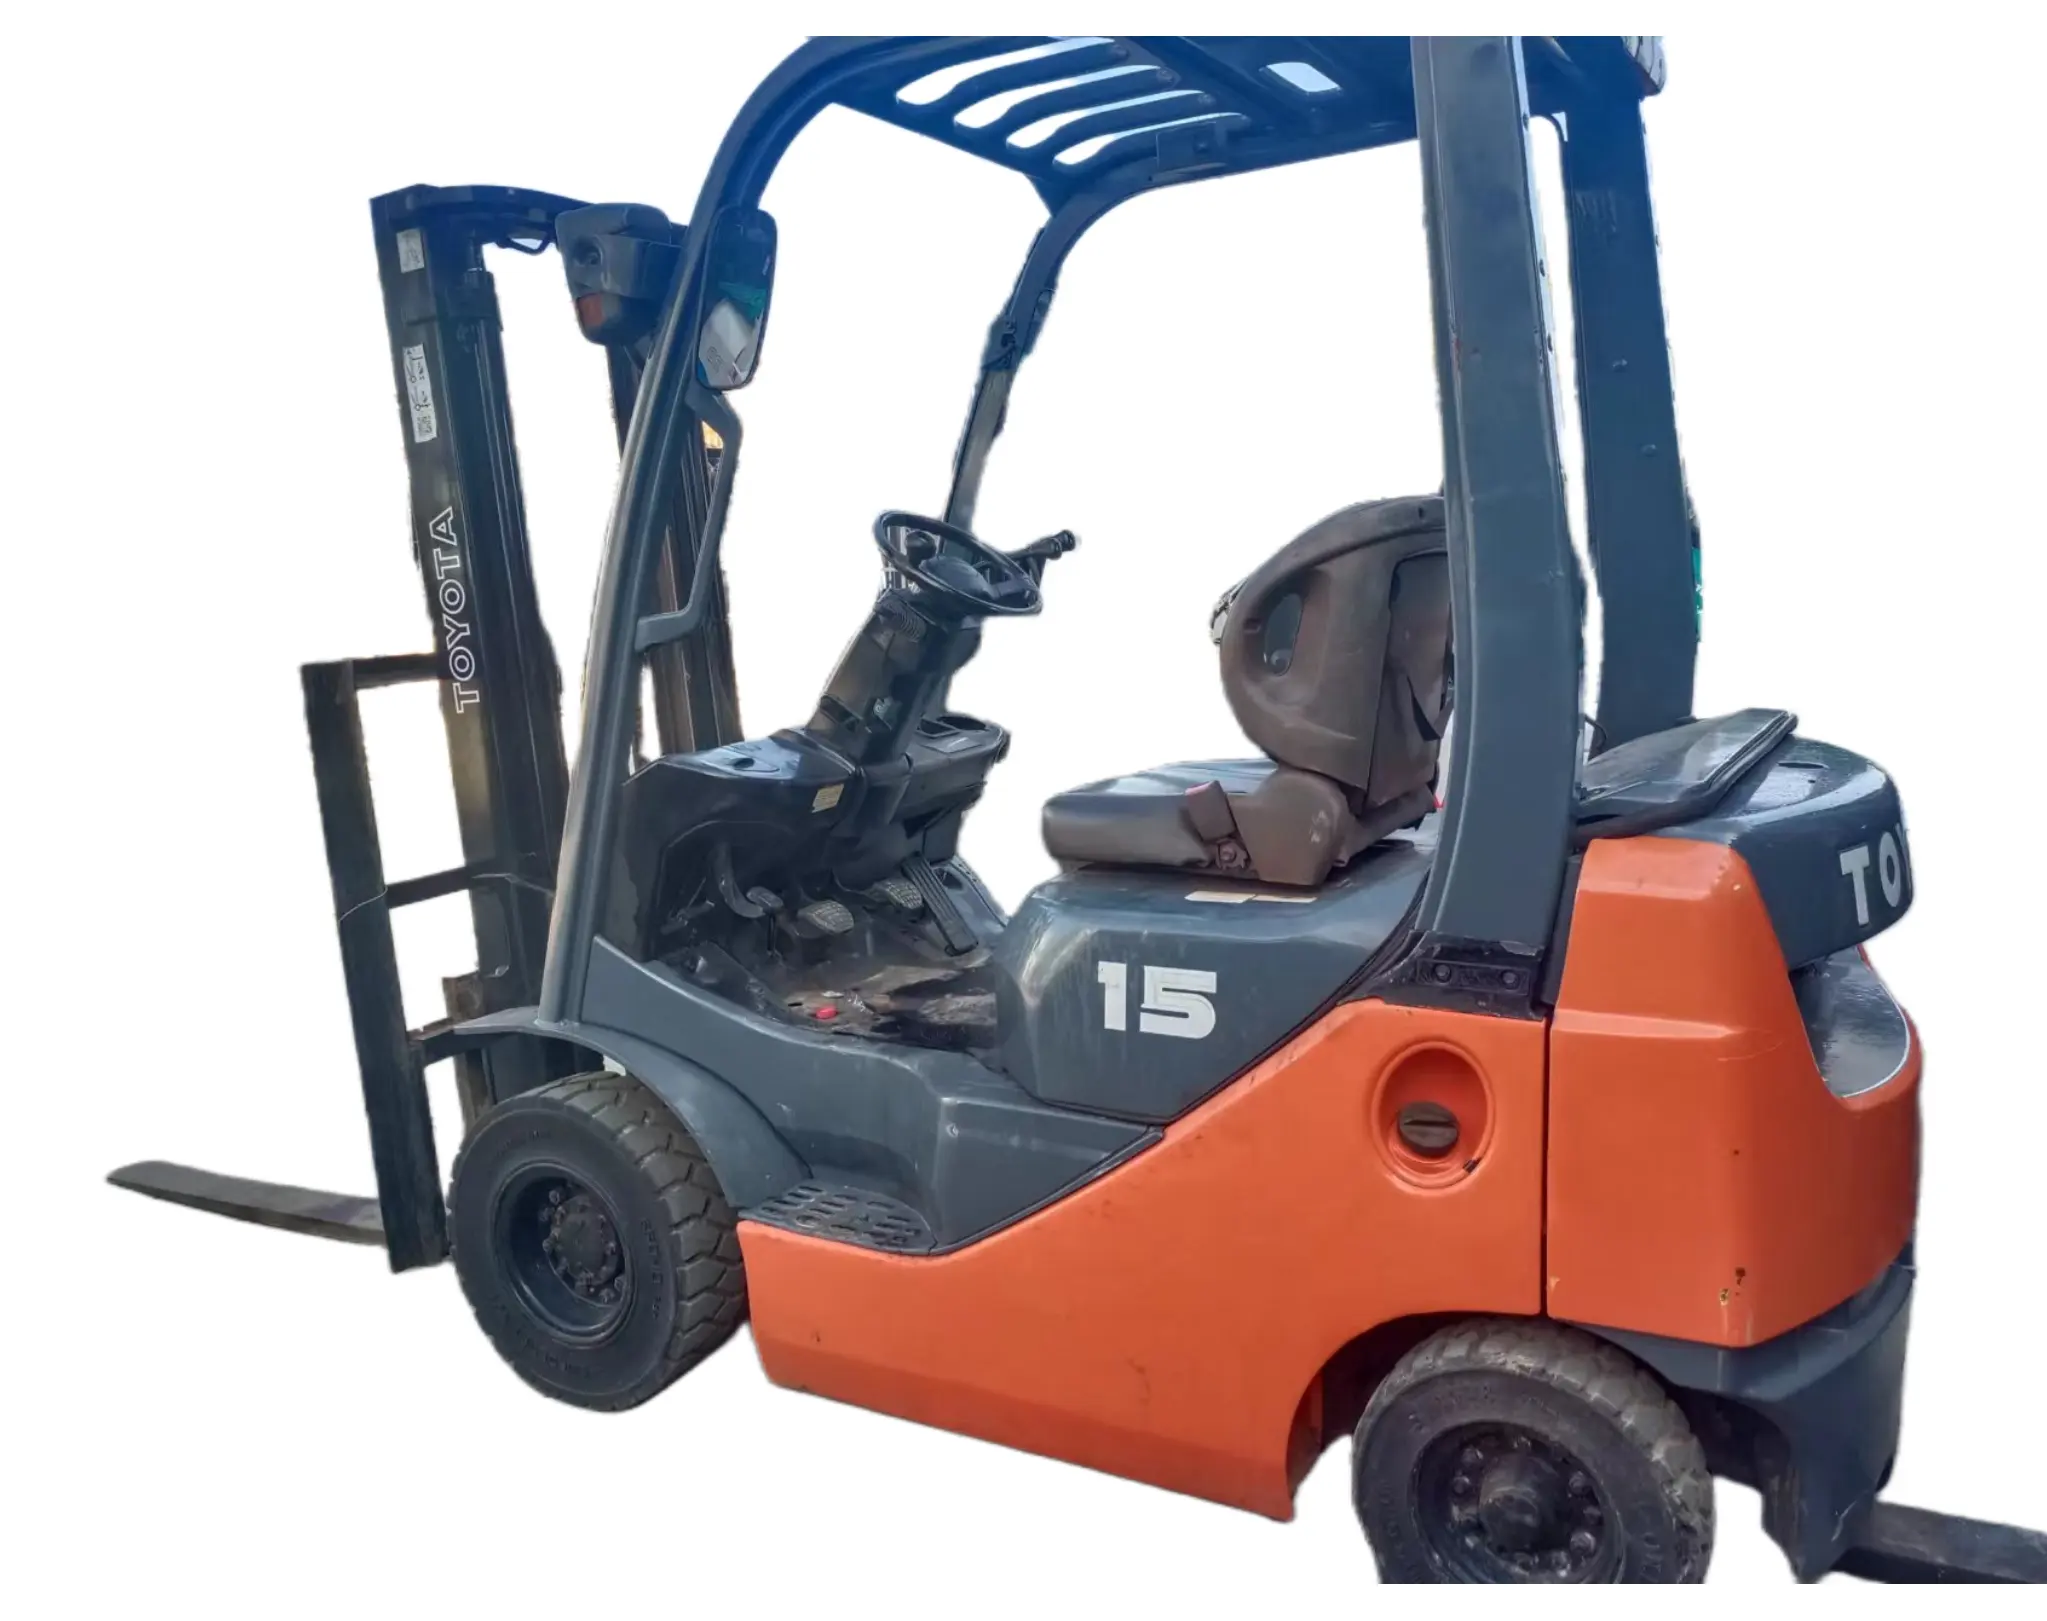 Used diesel power TOYOTA FD15 mini forklift truck excellent working condition 1.5ton hydraulic pallet lifting truck on hot sale